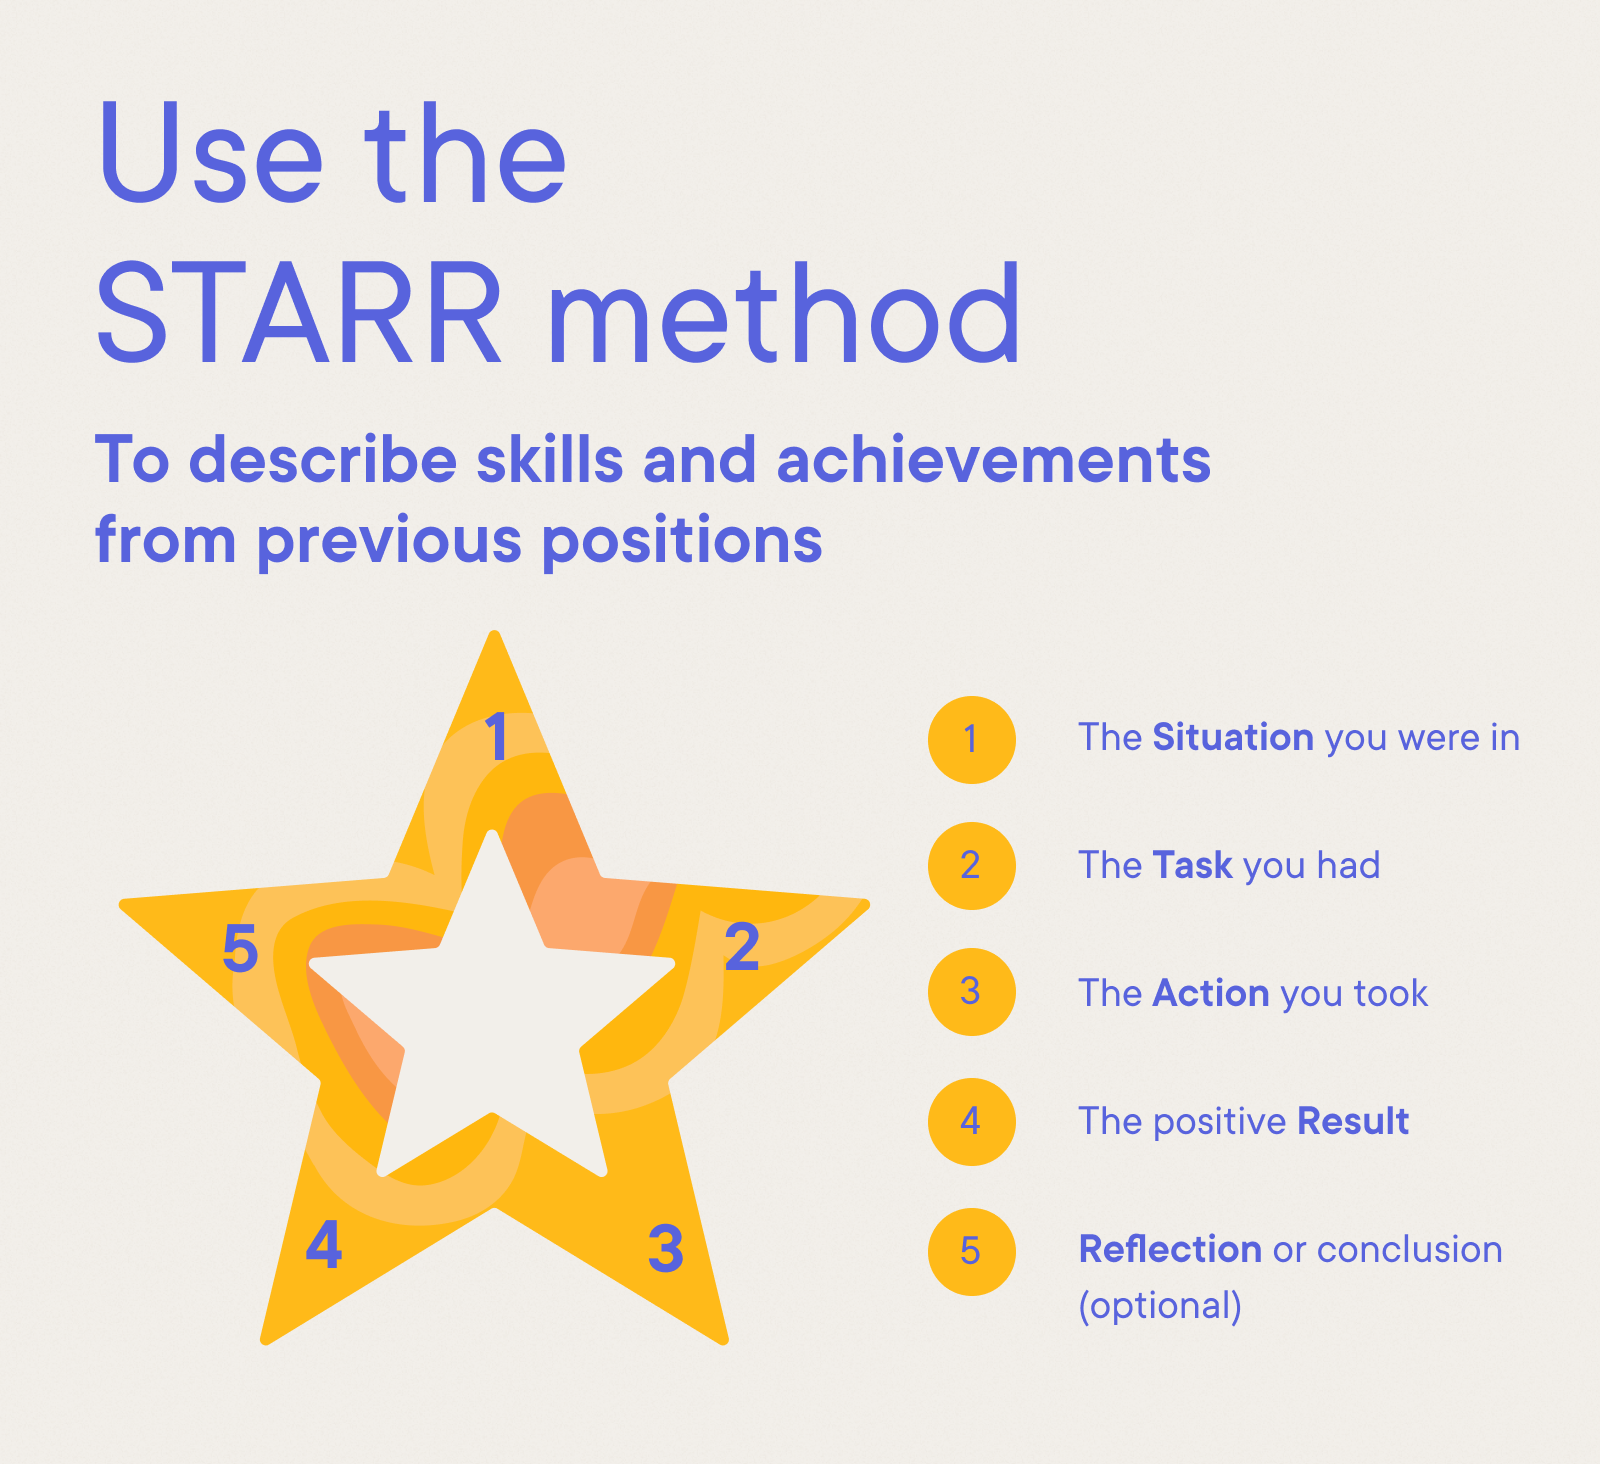 Product Manager - Use the STAR method